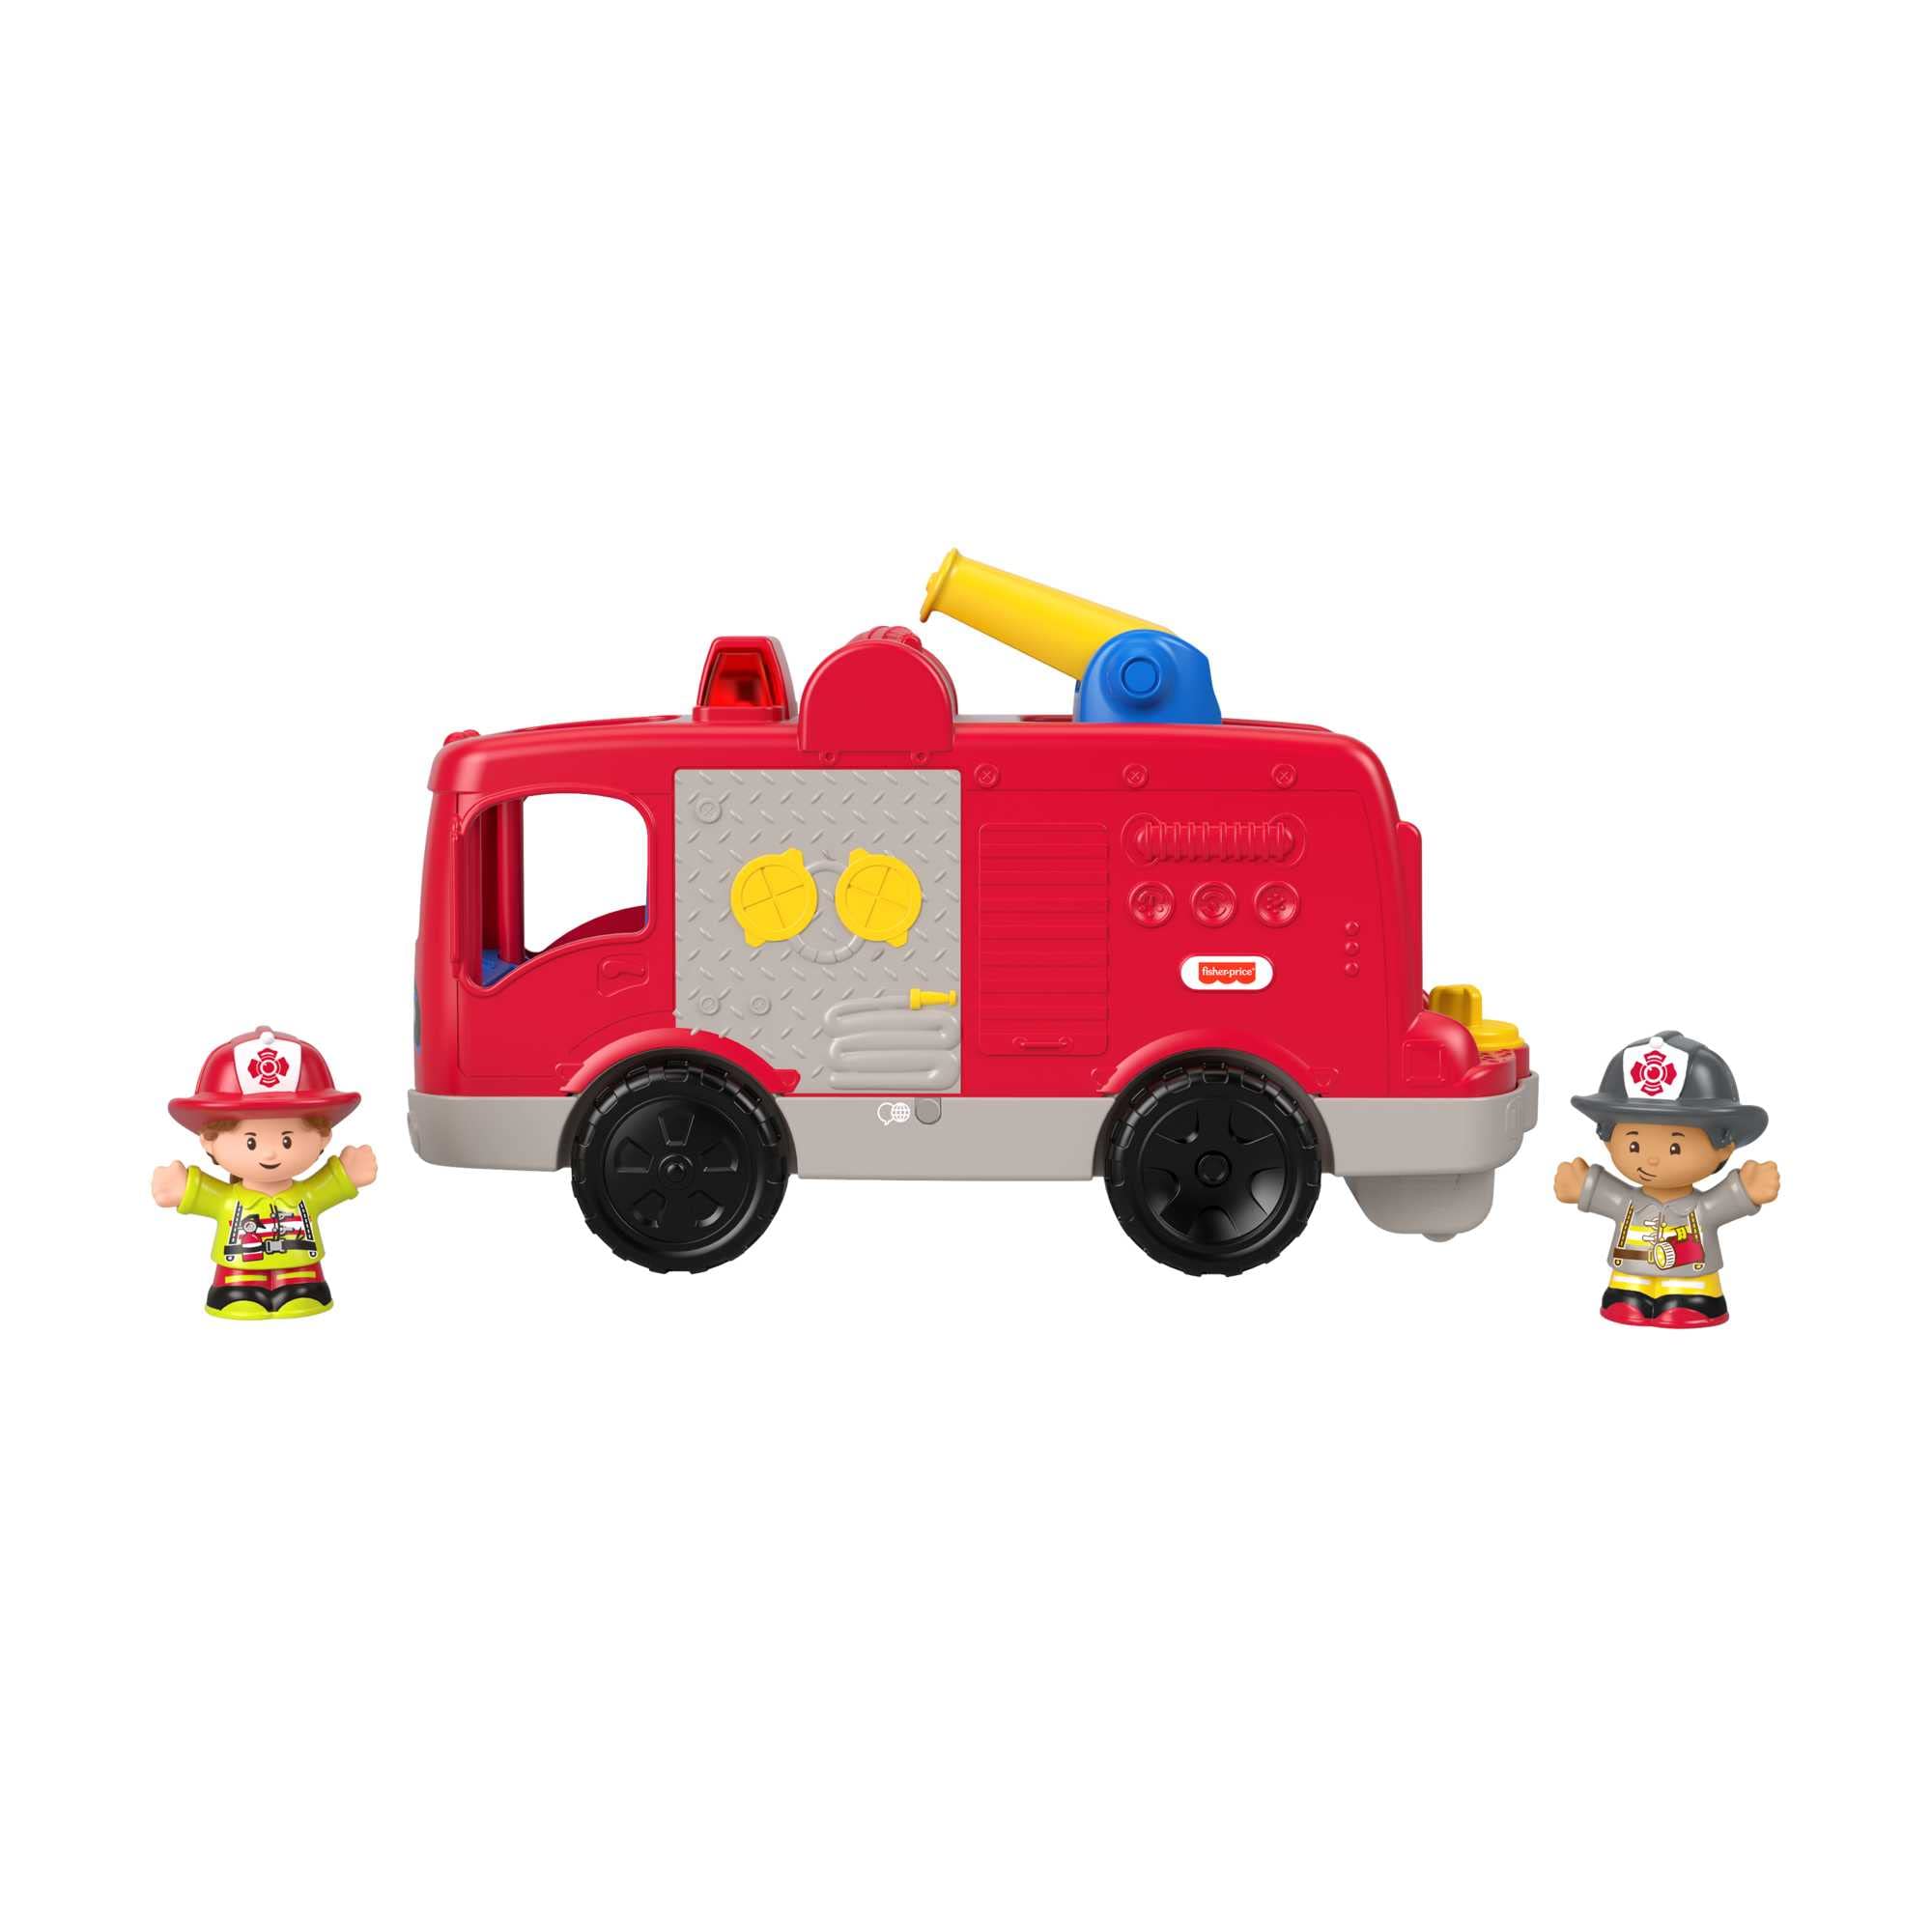 Fisher-Price Little People HCJ35 Fire Engine - Music Toy with Realistic Sounds and Songs, Includes 2 Firefighters and Multilingual Version for Toddlers from 1 Year